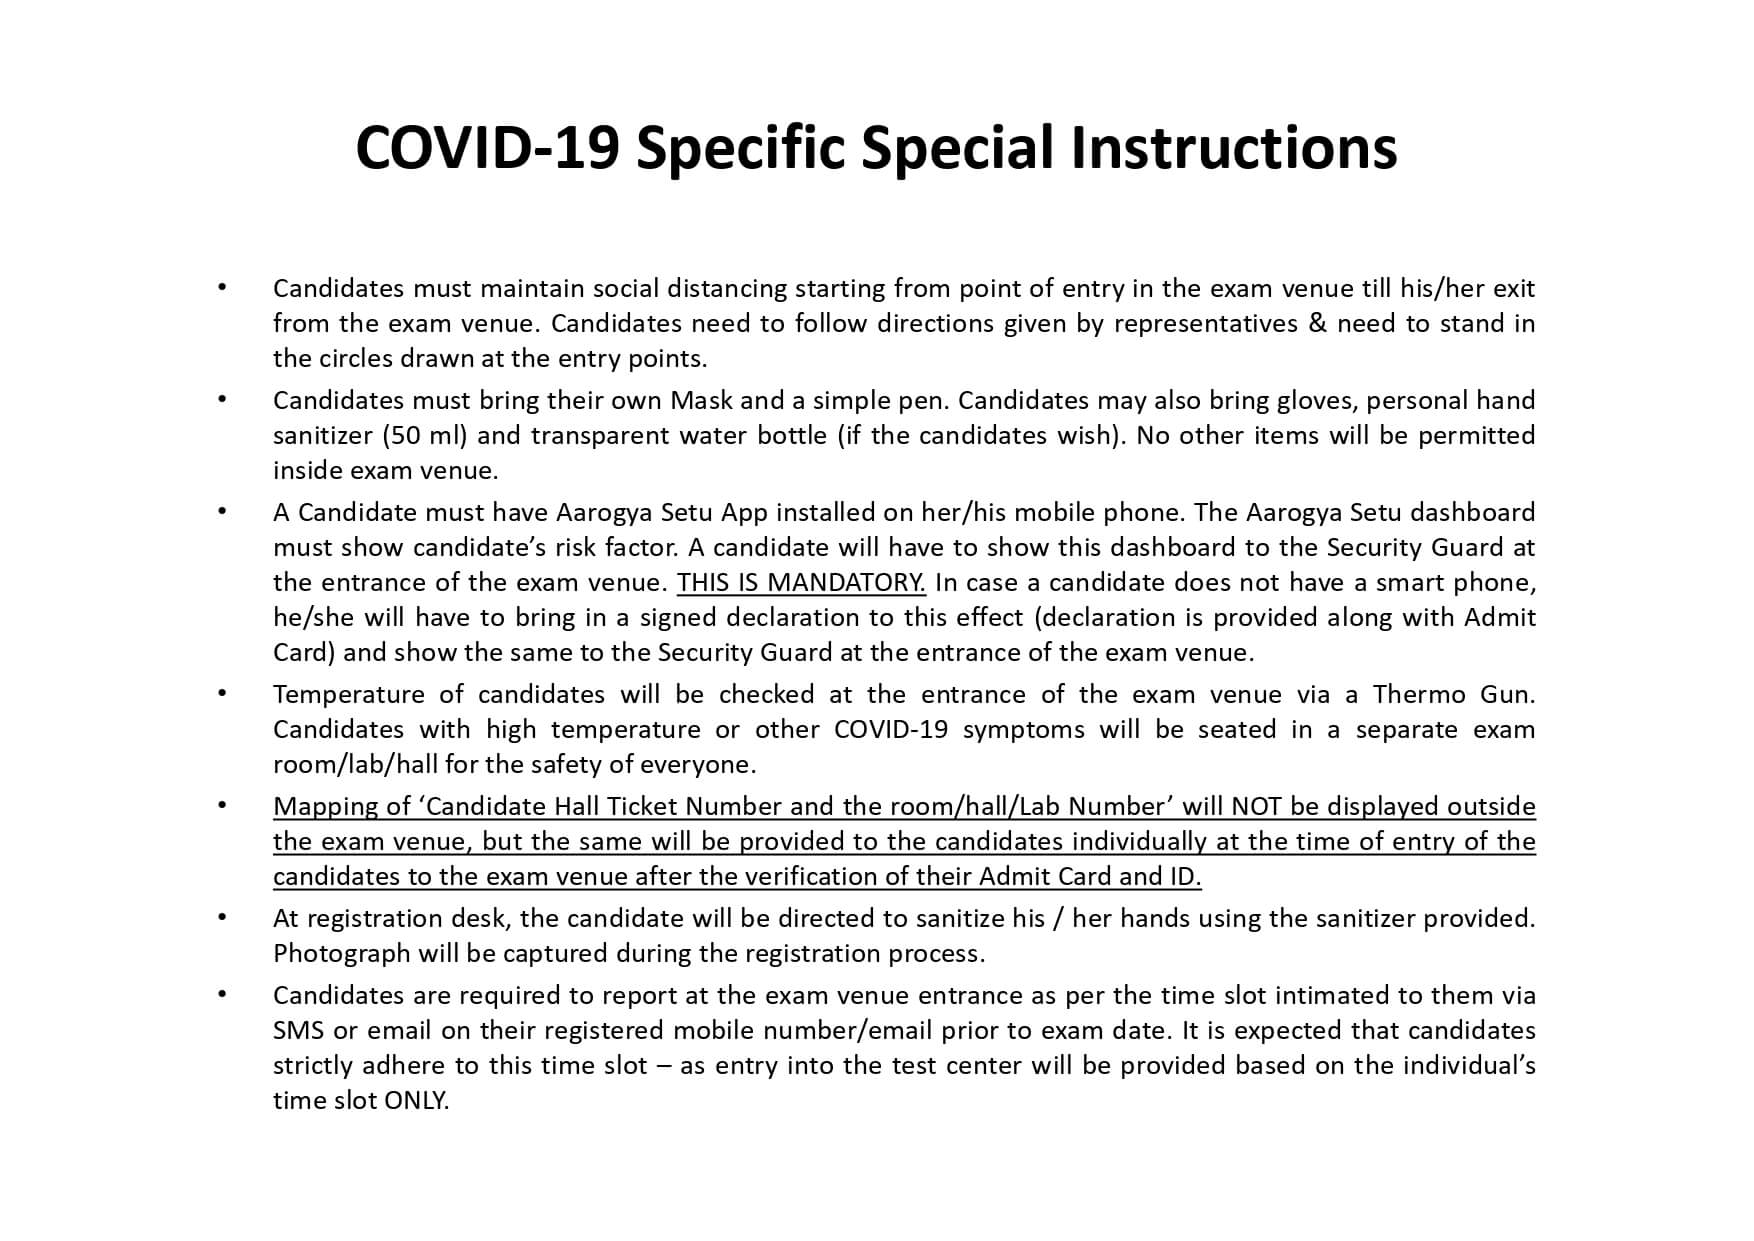 TS-EAMCET 2020 Special Instructions